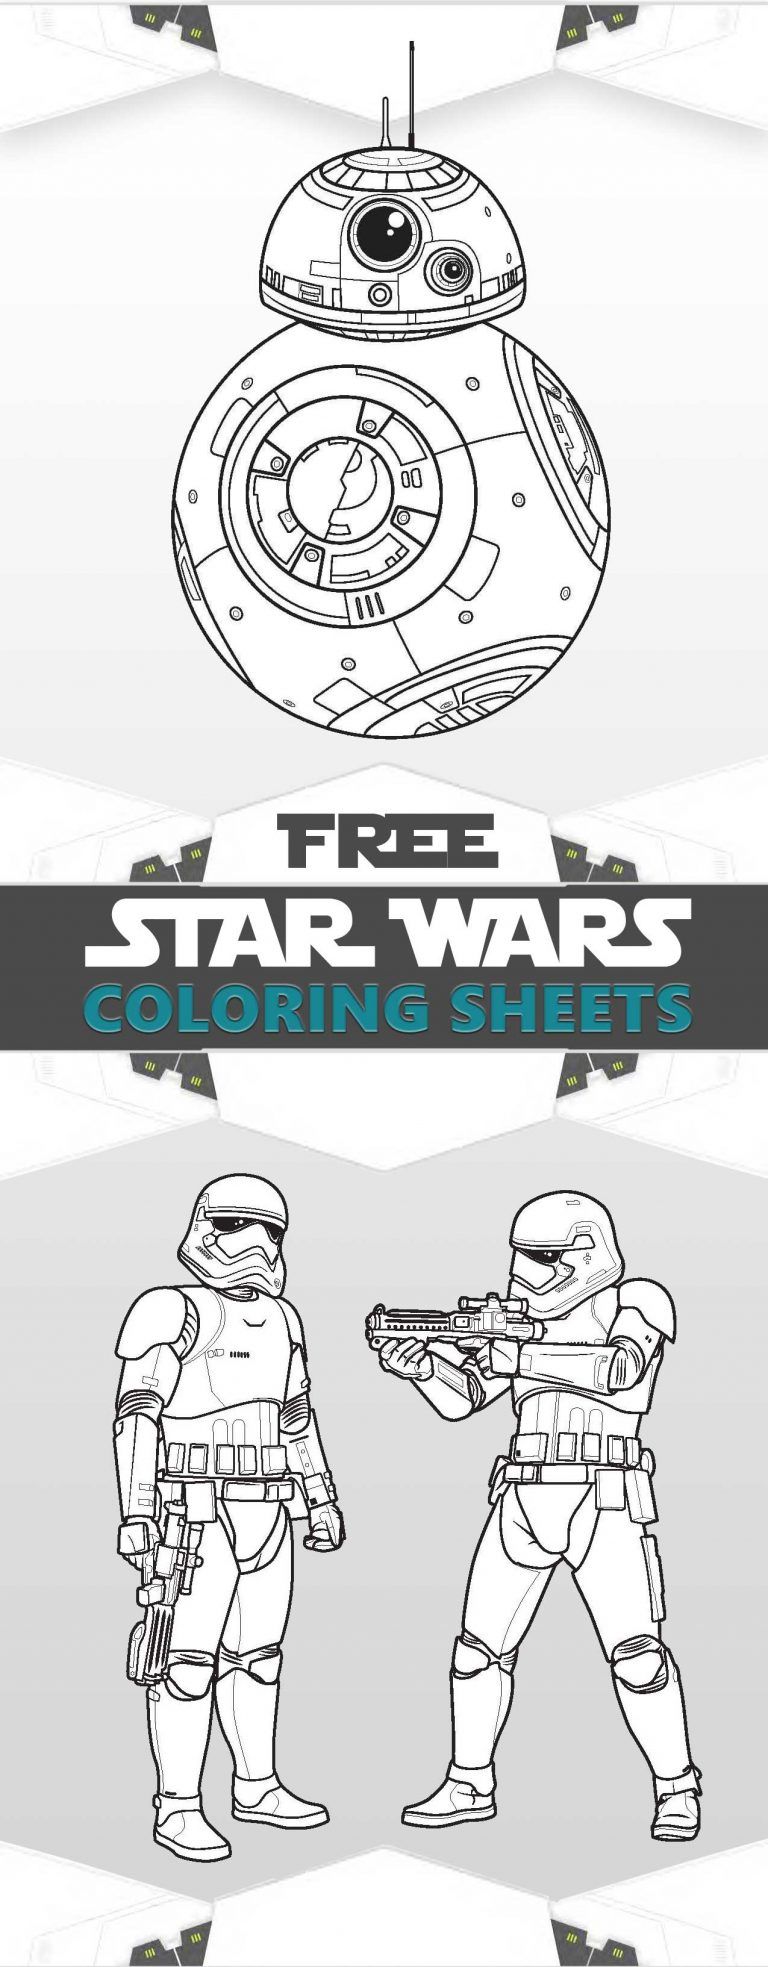 Star wars coloring pages the force awakens coloring pages star wars coloring sheet star wars coloring book star wars colors